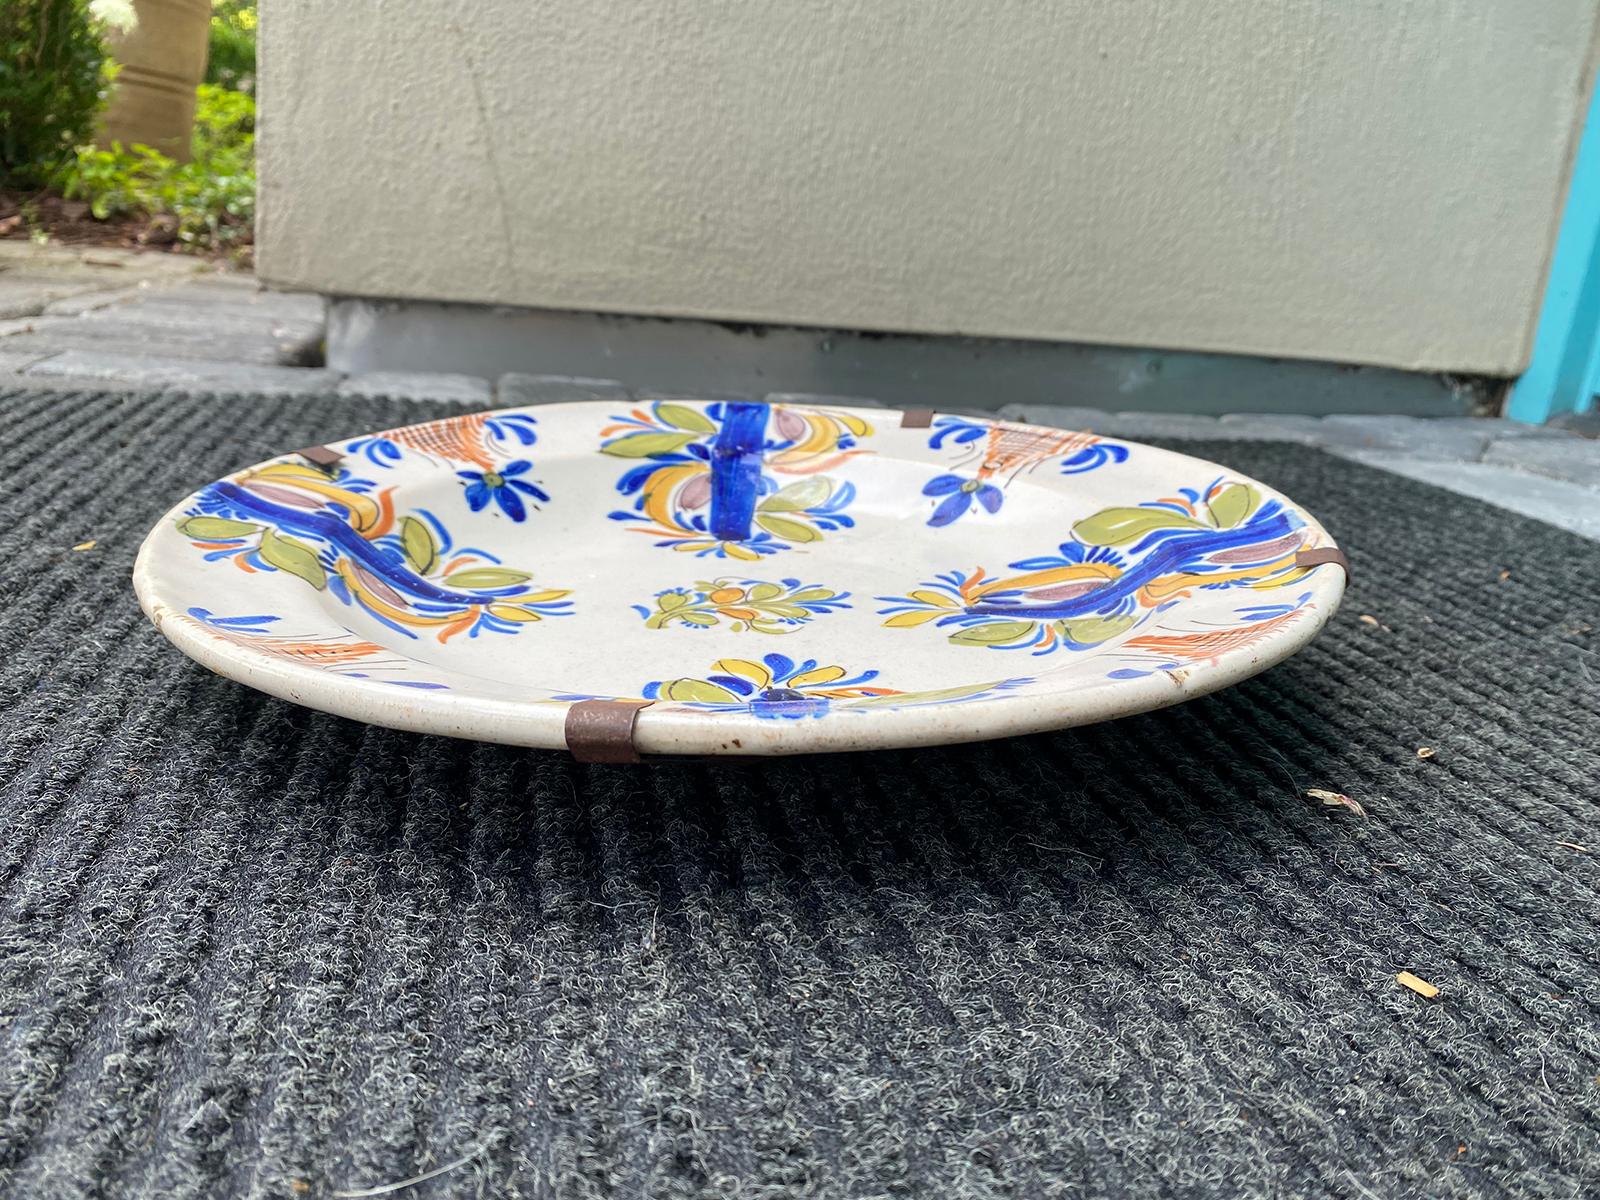 18th Century Delft Faience Polychrome Charger with Plate Hanger, Signed V.M.D. In Good Condition For Sale In Atlanta, GA